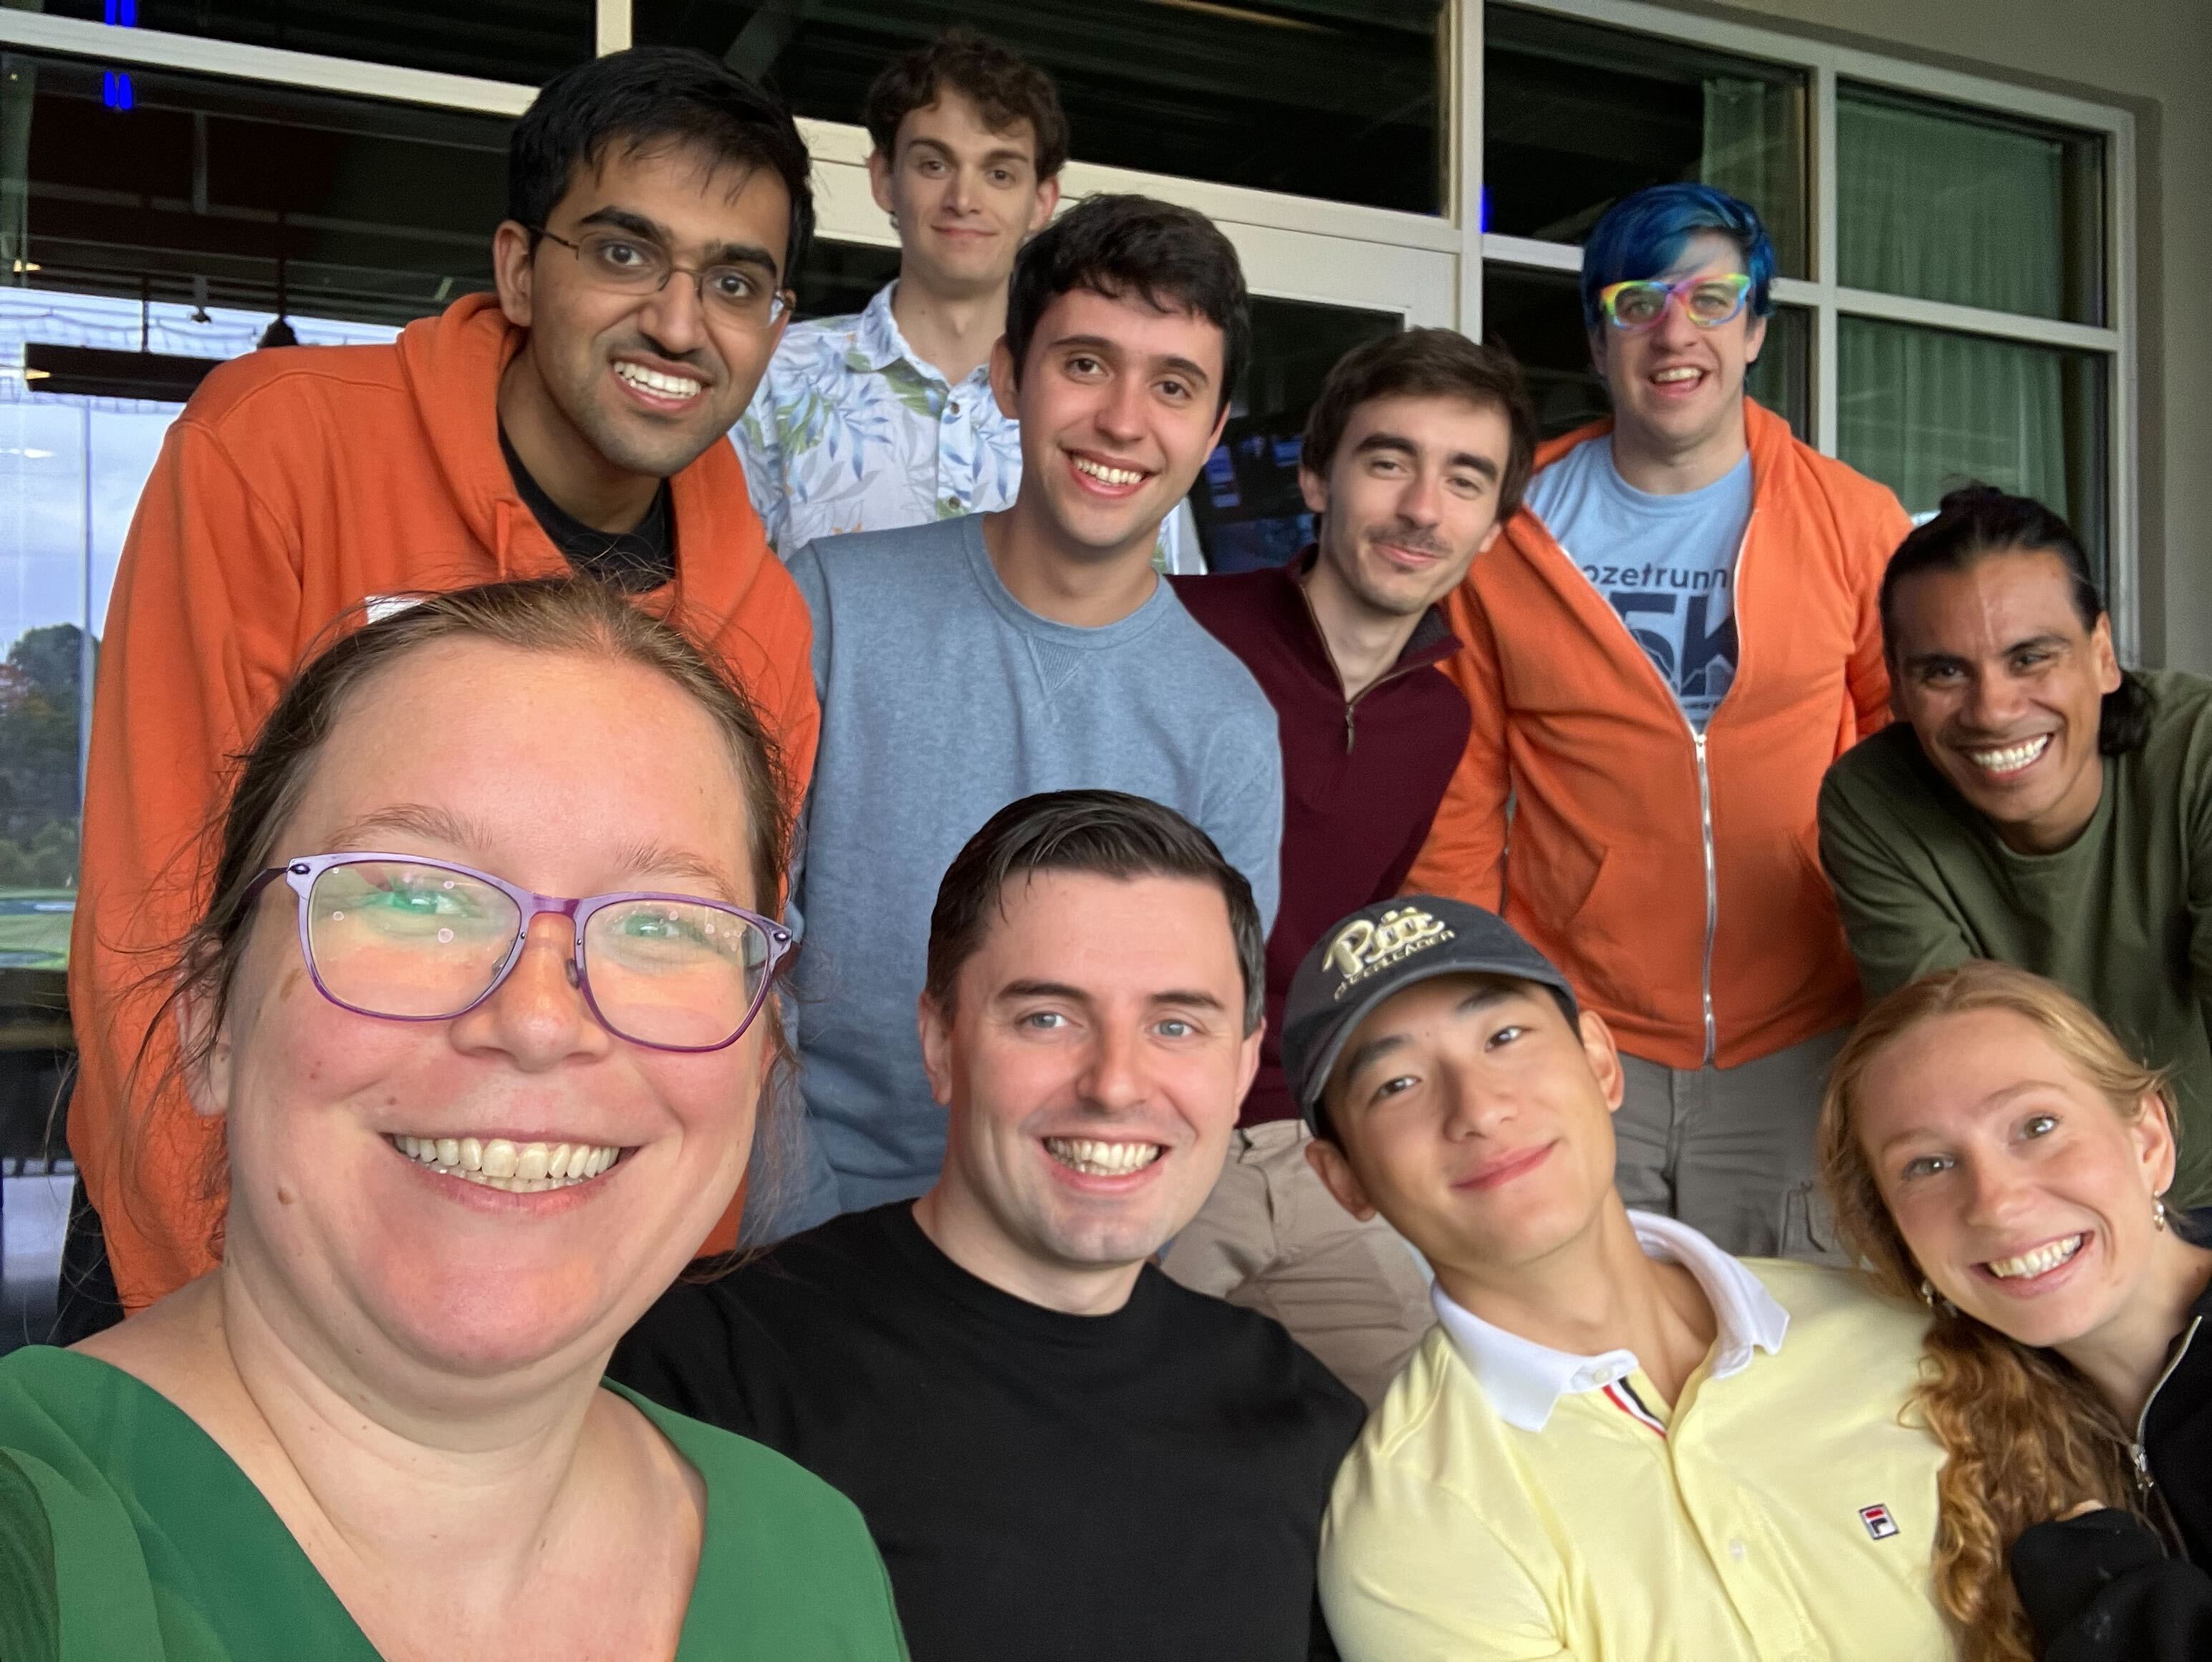 squaresLab goes to Topgolf